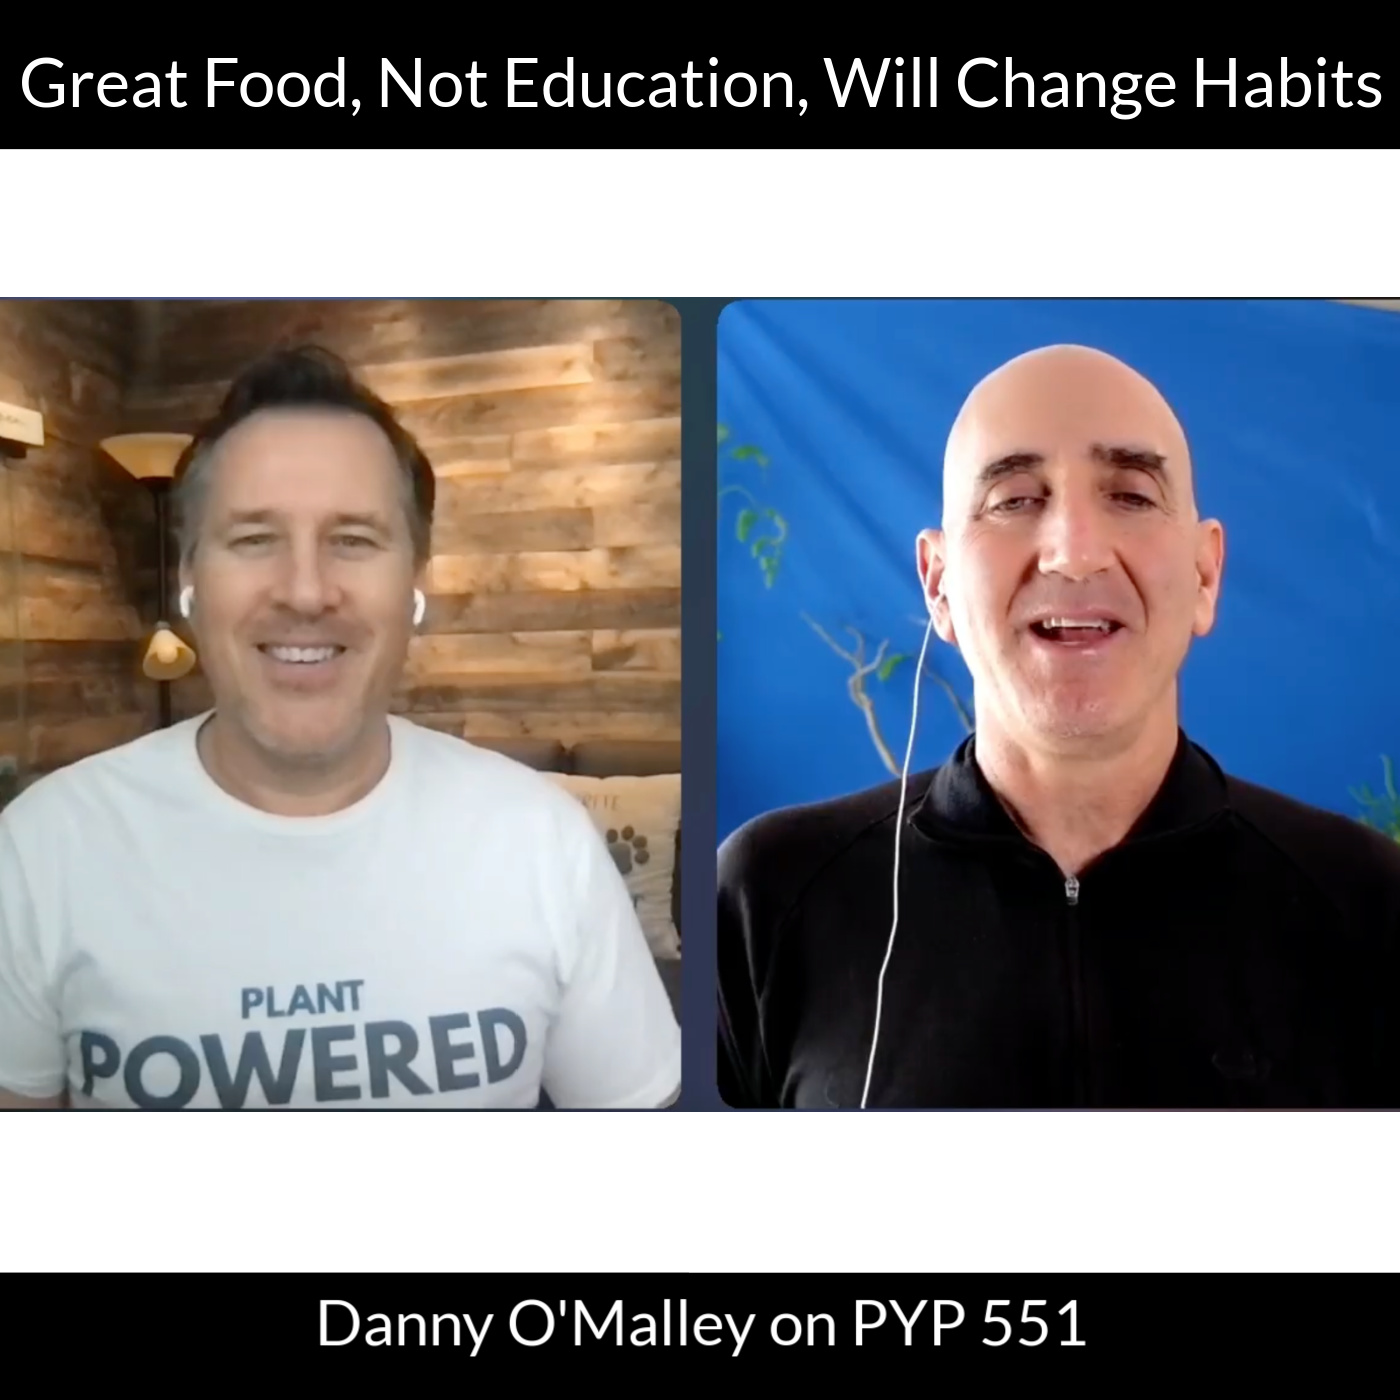 Great Food, Not Education, Will Change Habits: Danny O'Malley on PYP 551